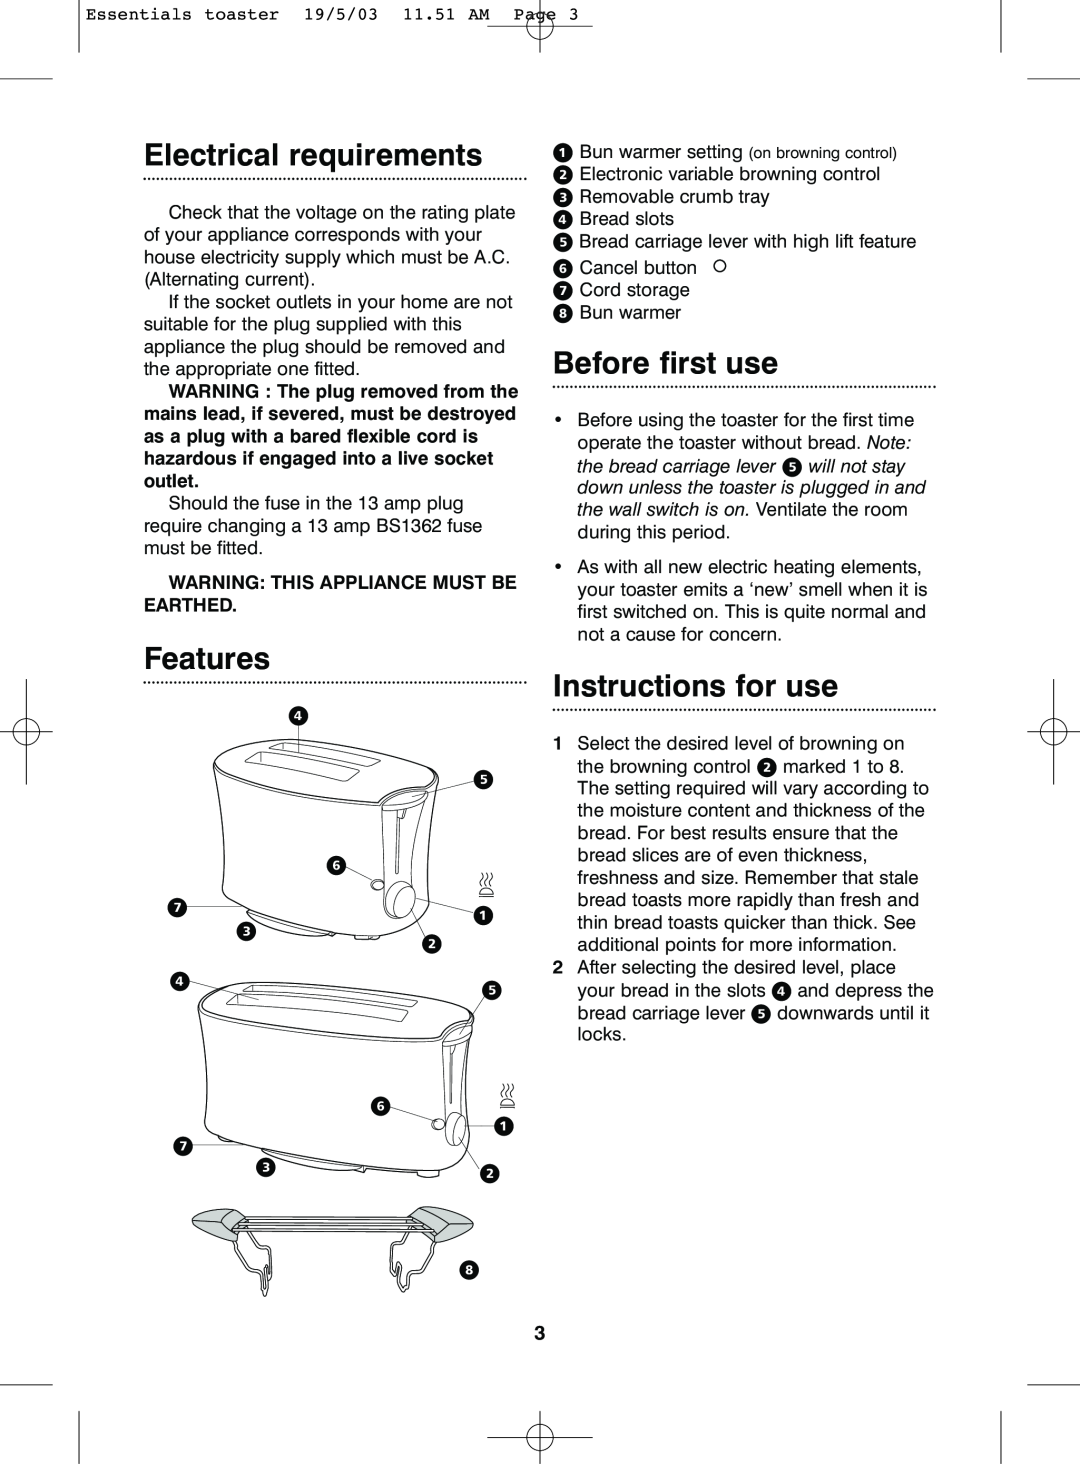 Morphy Richards 2 & 4 slice essentials toaster Electrical requirements, Before first use, Features, Instructions for use 